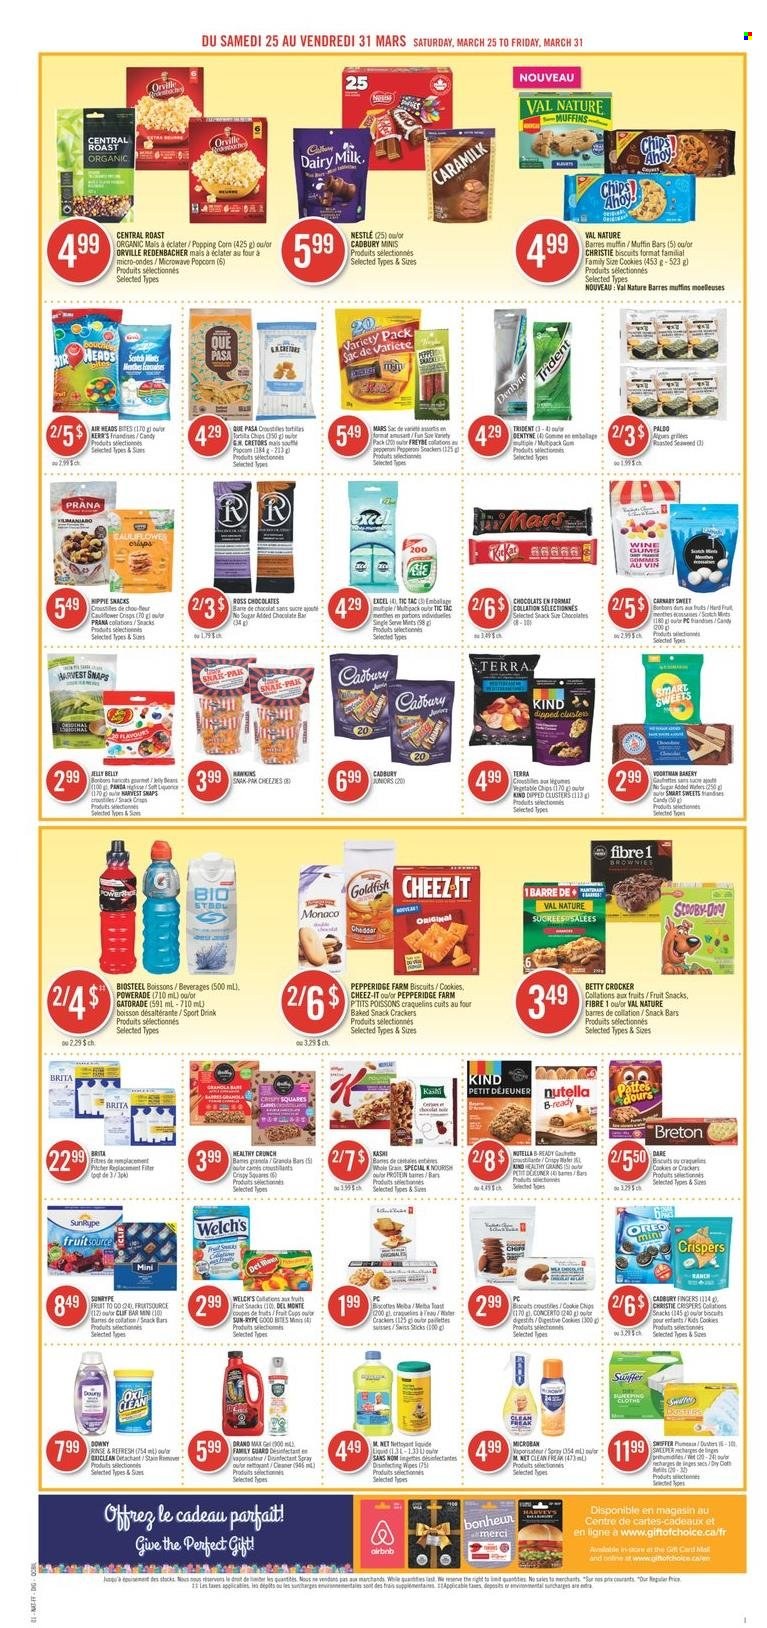 thumbnail - Pharmaprix Flyer - March 25, 2023 - March 31, 2023 - Sales products - brownies, muffin, corn, Welch's, trout, roast, pepperoni, cheese, cookies, chocolate, Mars, jelly, crackers, biscuit, Cadbury, Merci, Dairy Milk, Digestive, Tic Tac, Trident, fruit snack, Chips Ahoy!, snack bar, chips, popcorn, vegetable chips, Goldfish, Cheez-It, seaweed, Harvest Snaps, Del Monte, Powerade, Gatorade, water, wipes, cleaner, Swiffer, antibacterial spray, panda, cart, granola, Nestlé, Nutella, Oreo, desinfection. Page 6.